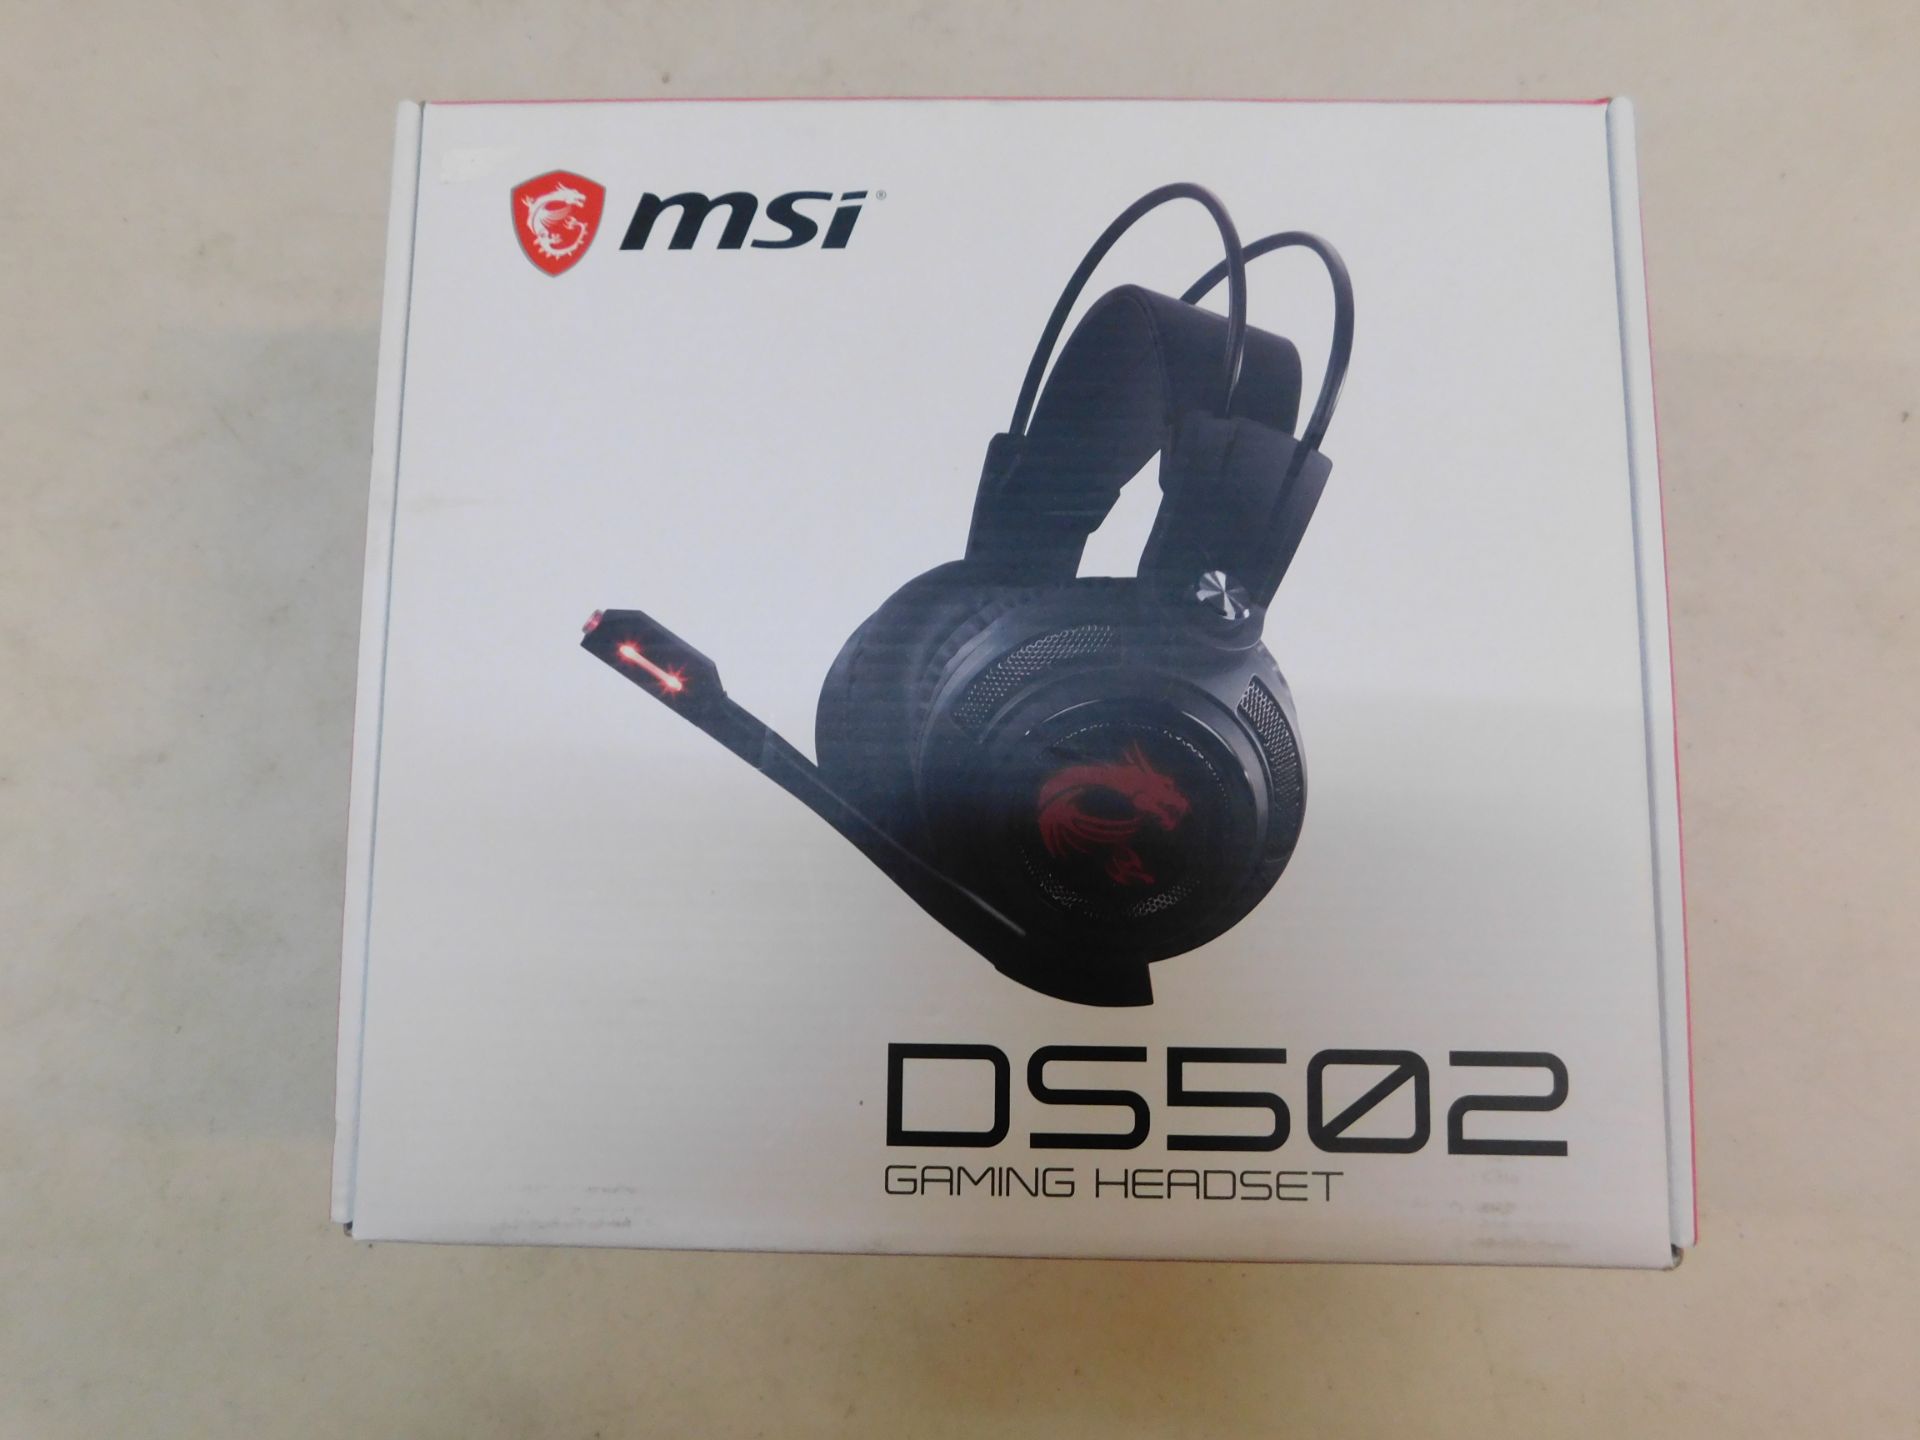 1 BOXED MSI DS502 GAMING HEADSET RRP Â£59.99